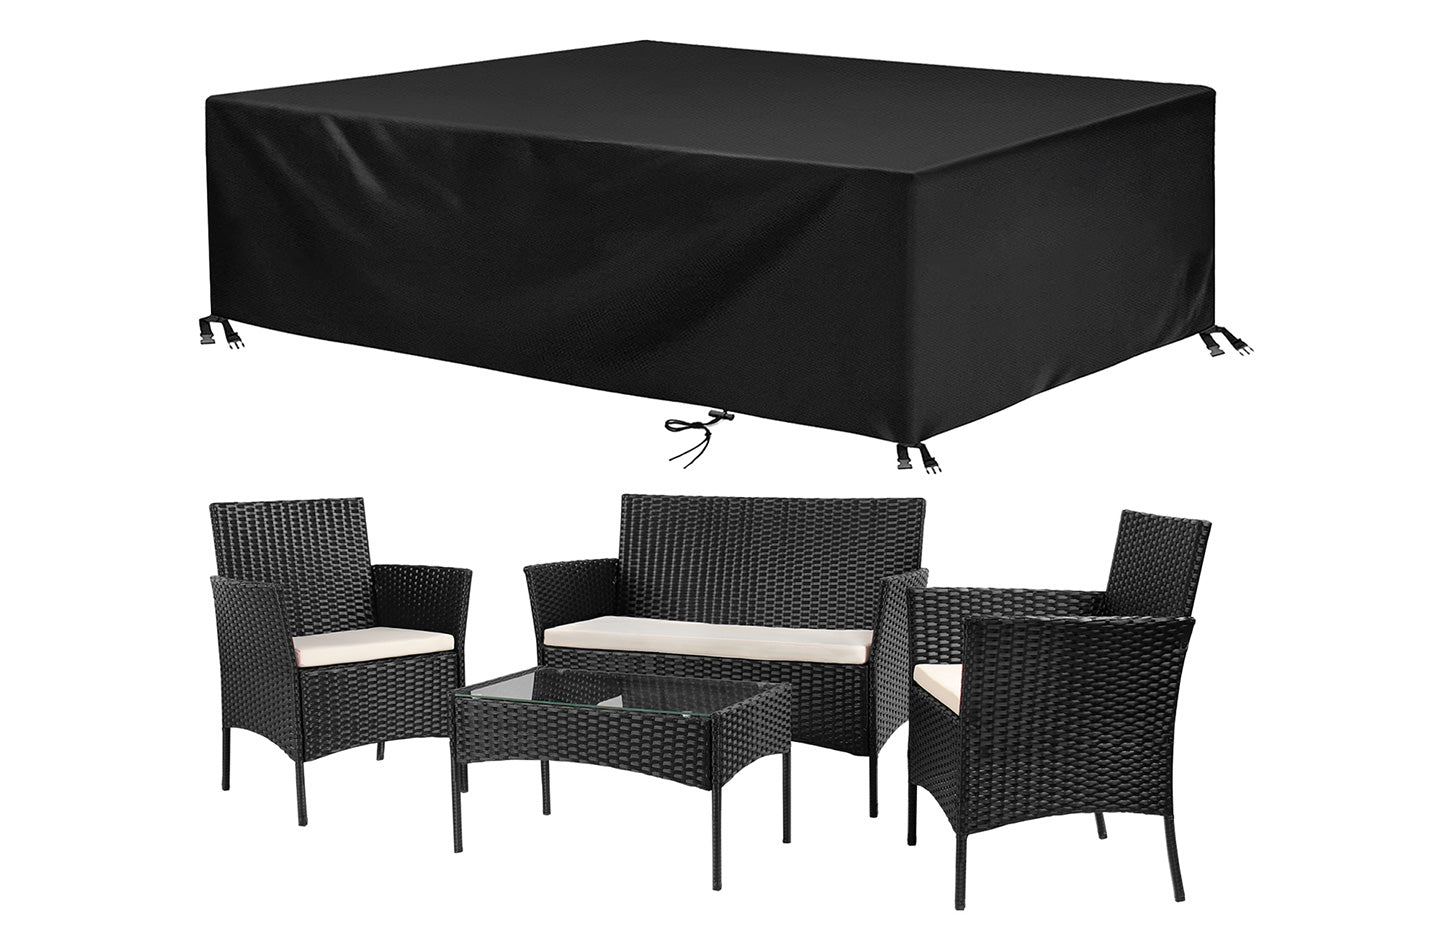 4 Piece Rattan Patio Set Outdoor Garden Furniture Table Chairs with Protective Cover Black